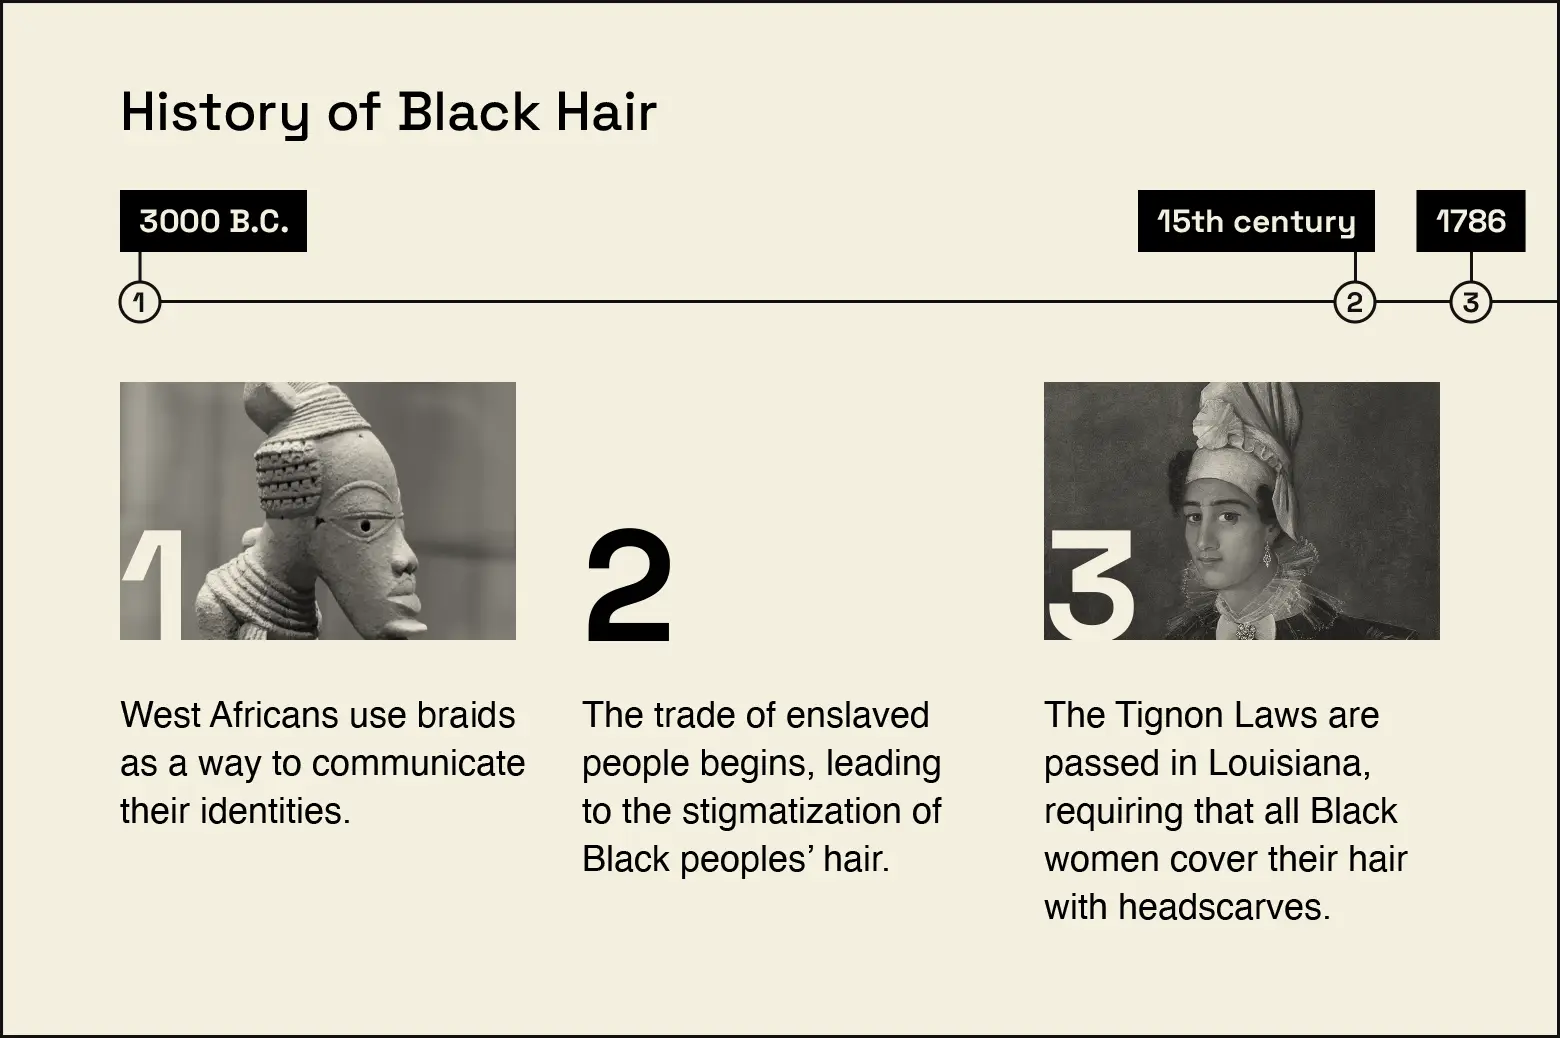 Timeline covers key moments in Black hair history from 3000 B.C. to 1786.